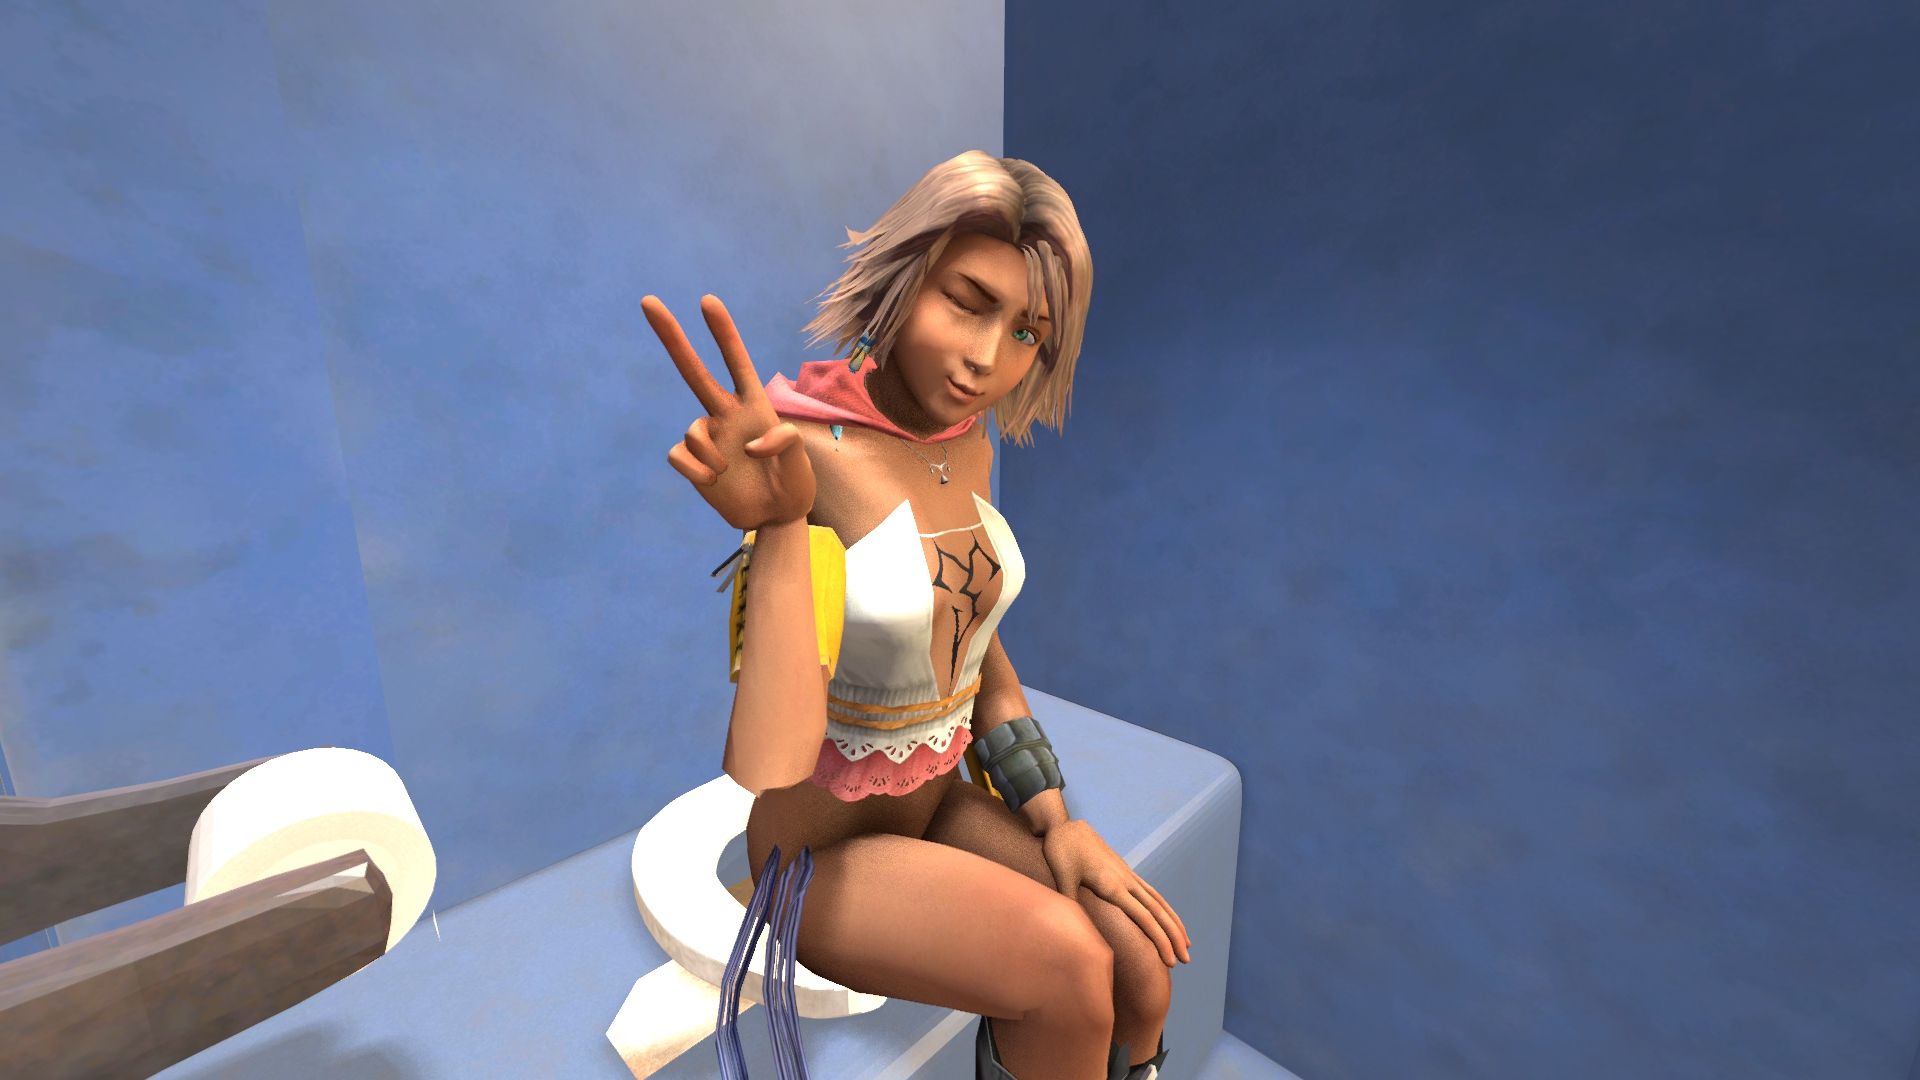 Yuna blowing a kiss with Peace sign.